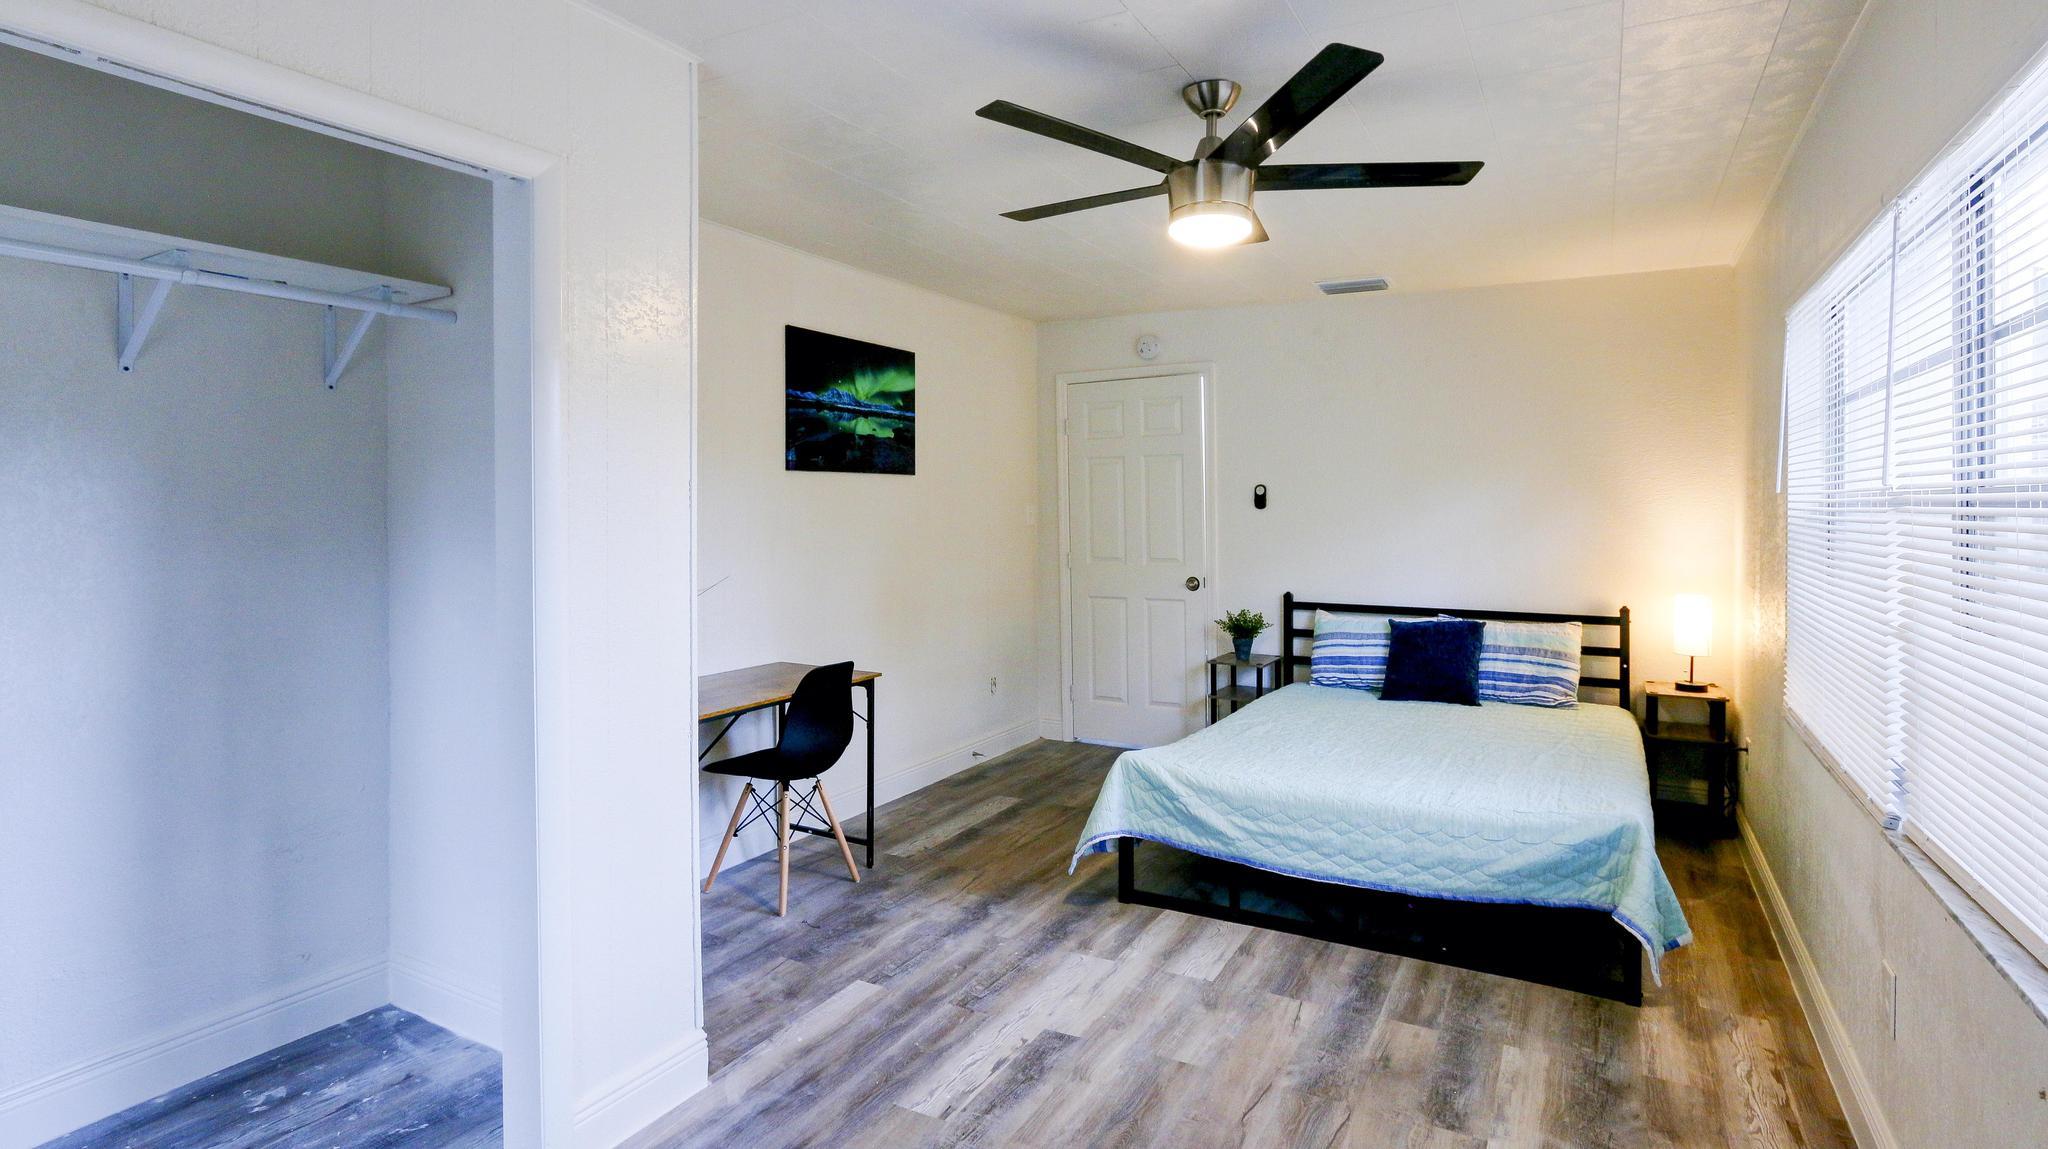 Rooms for rent with private entrance in Tampa, FL